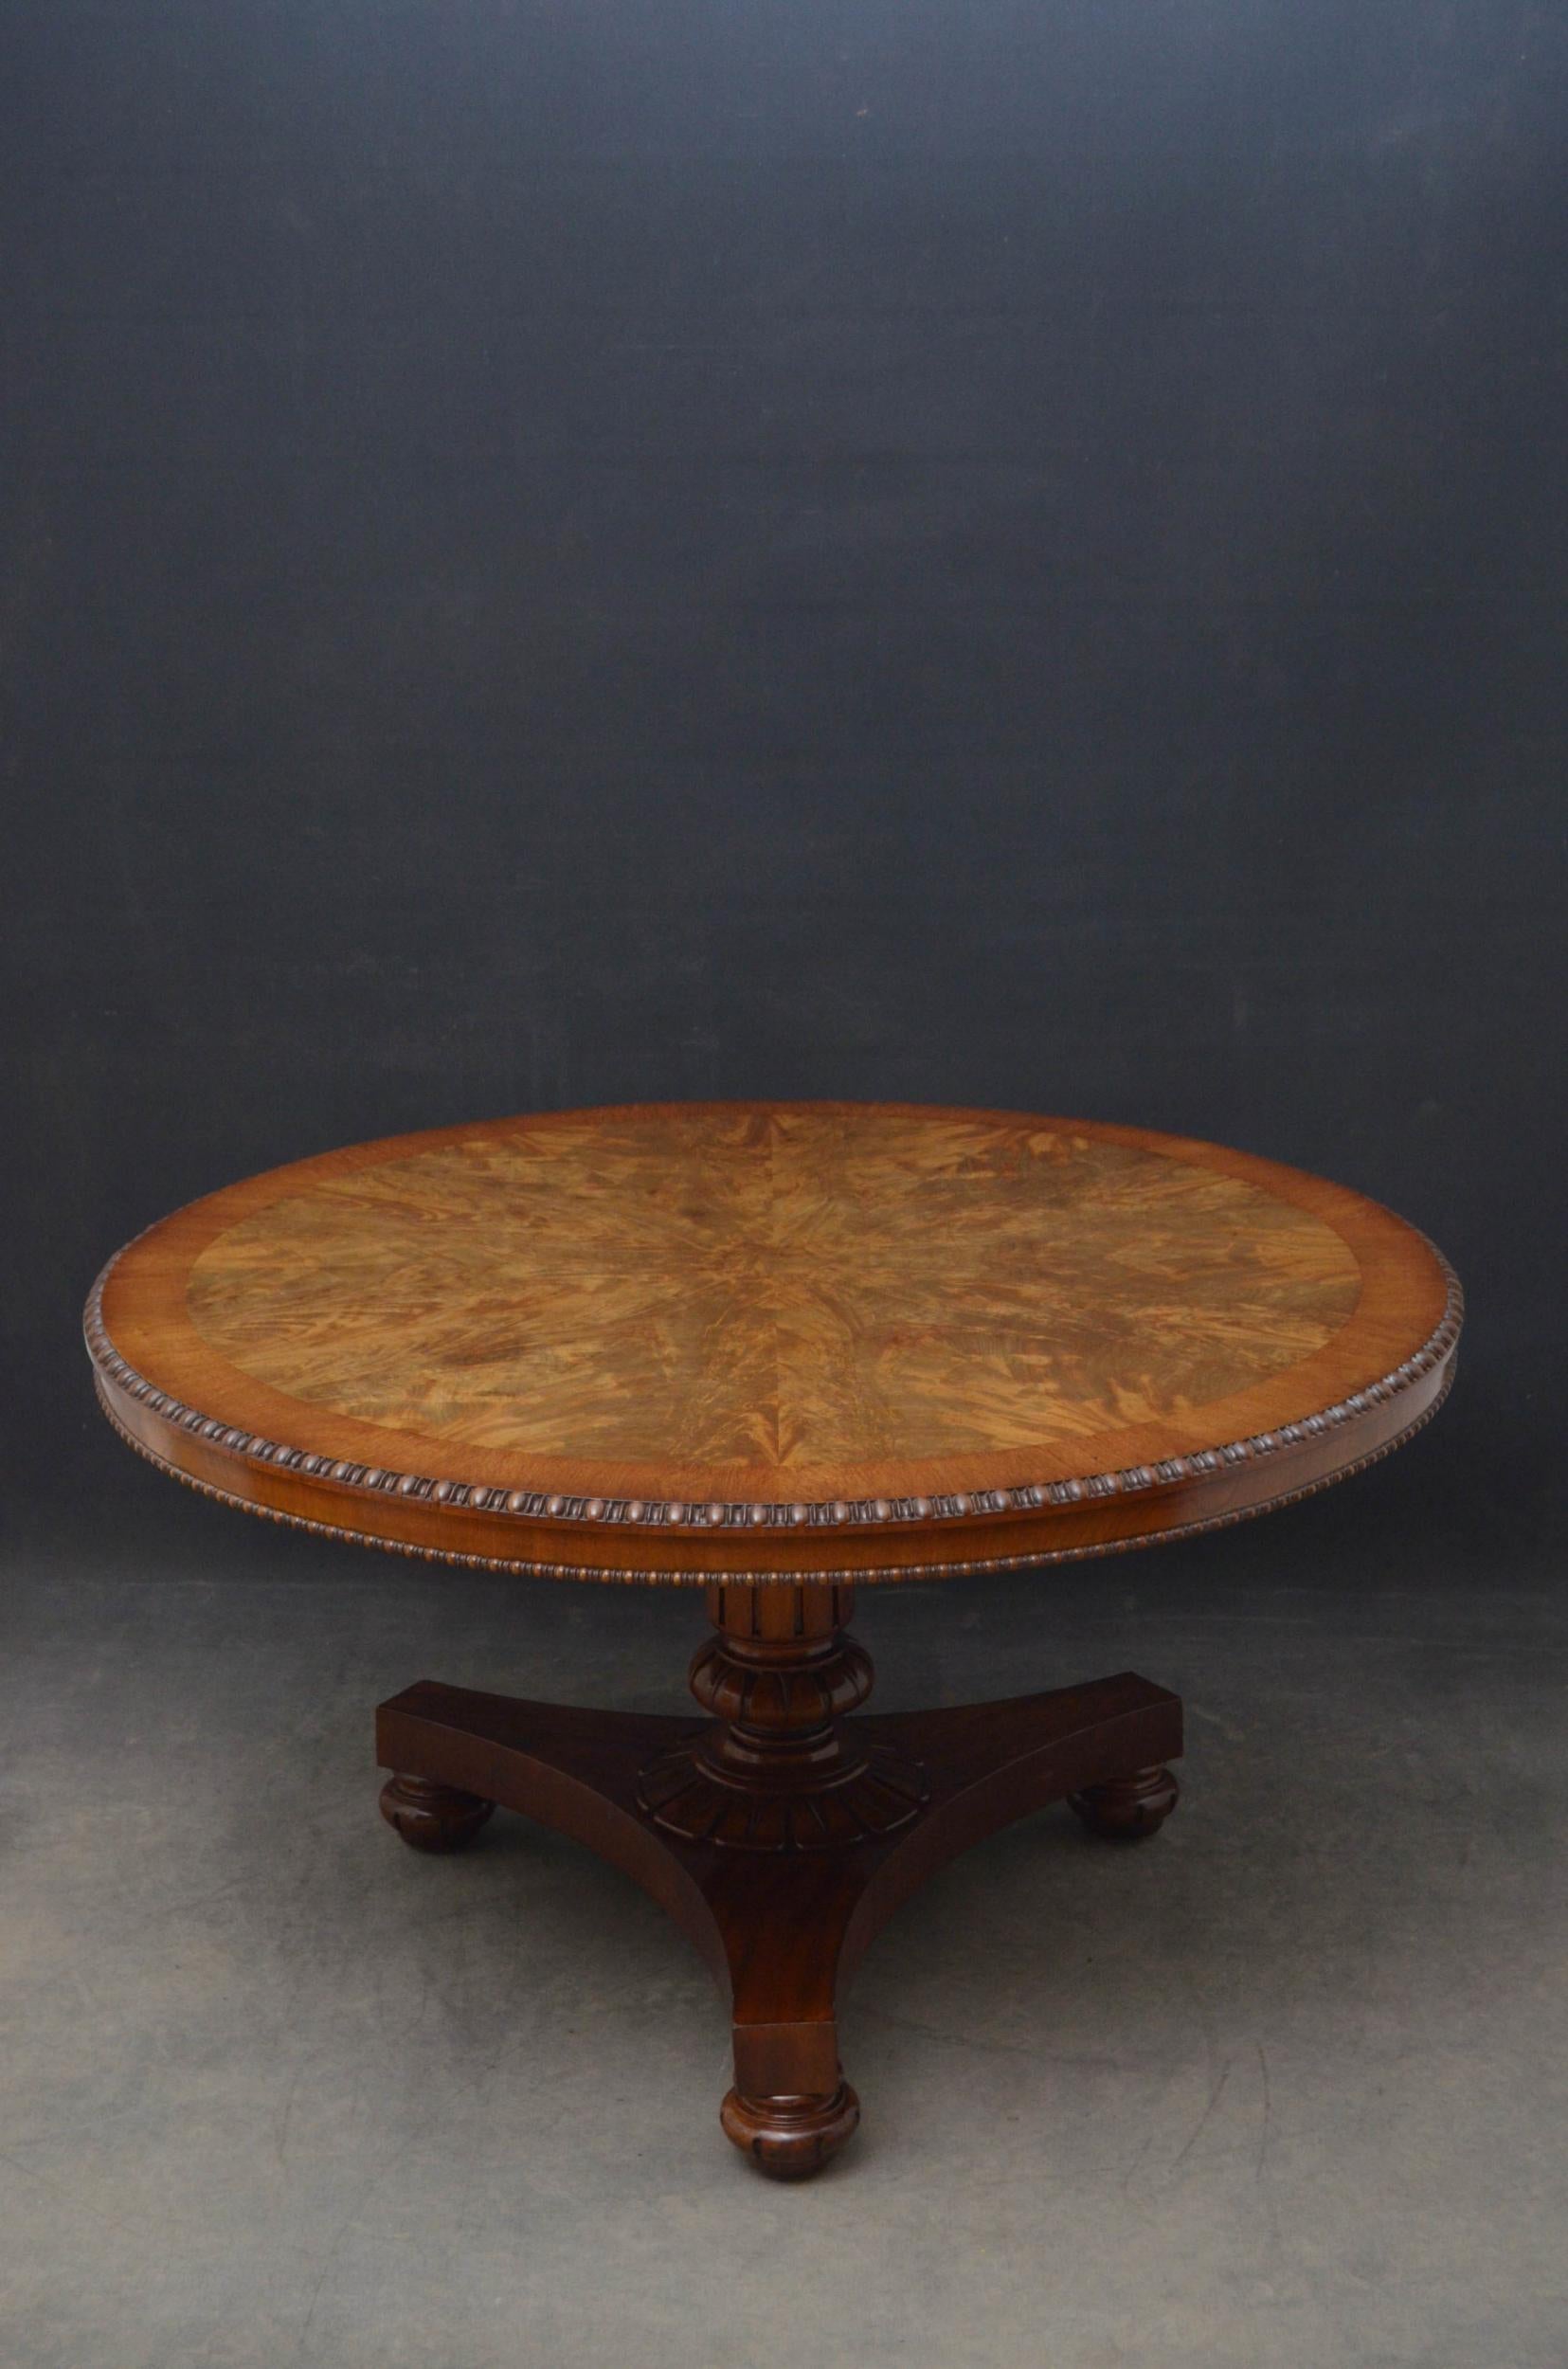 Sn5076 Superb quality William IV mahogany centre or dining table, having segmented flamed mahogany top with partridge wood banding and quarter bead to the edge above shallow frieze with beaded frieze, standing on carved and fluted column with petal